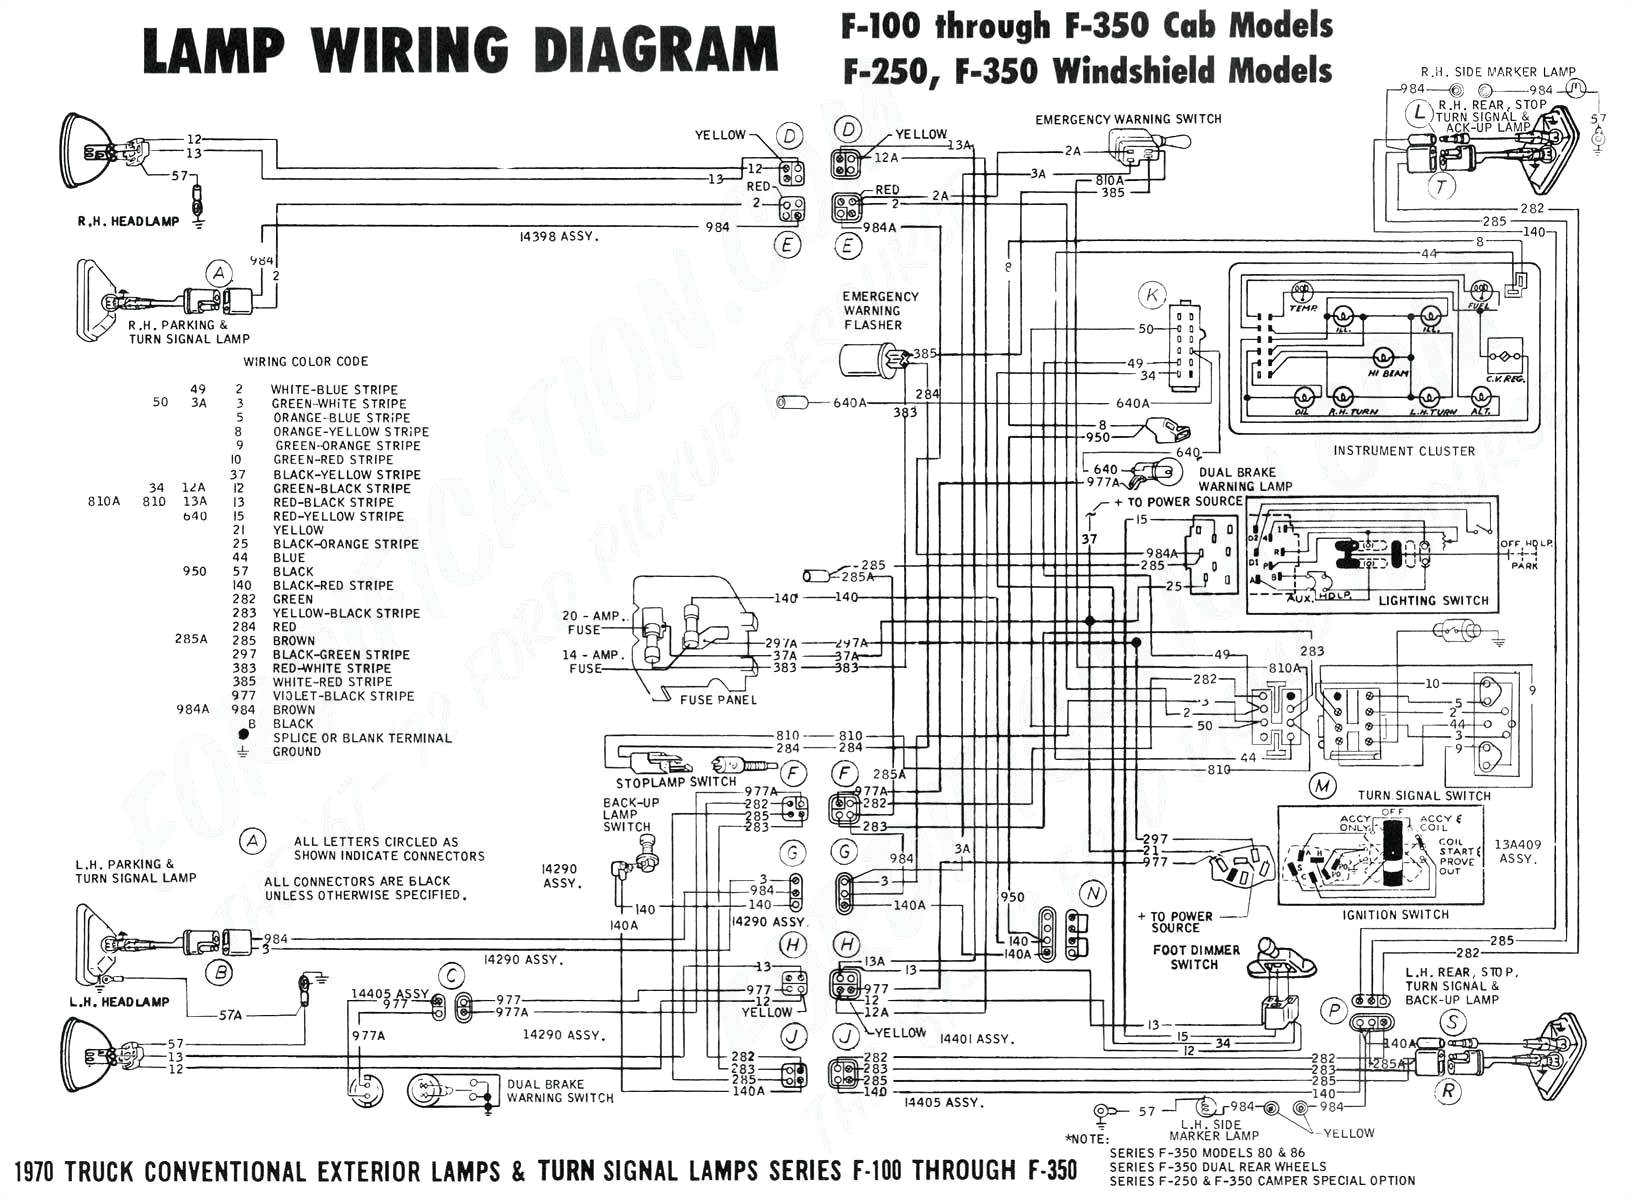 Wiring Diagram for Motorcycle Led Lights Ufo Led Tail Light Wiring Diagram Wiring Diagram Db